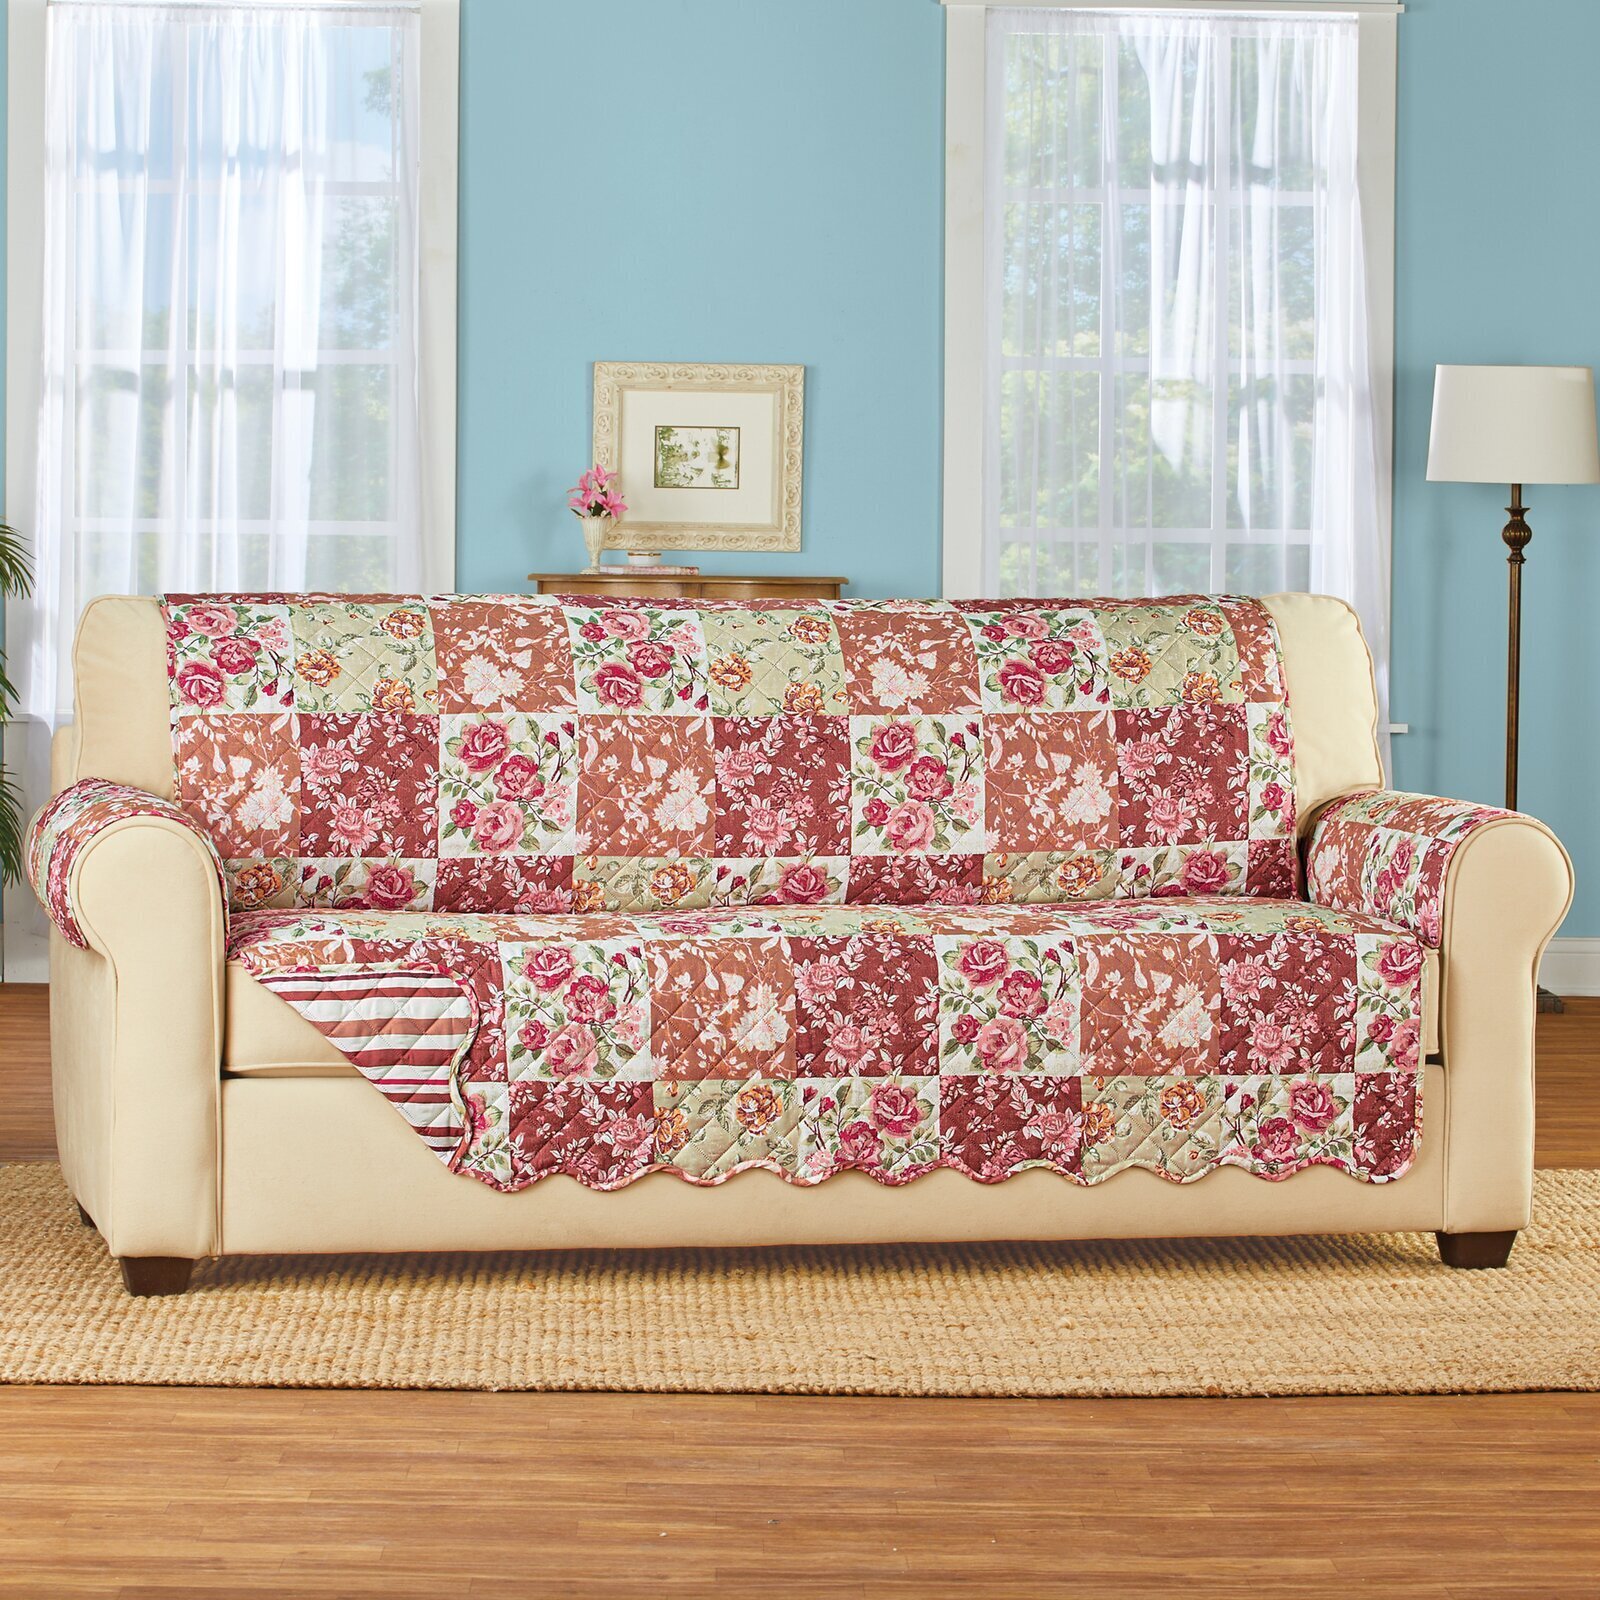 Burgundy and Pink Floral Print Country Couch Covers 